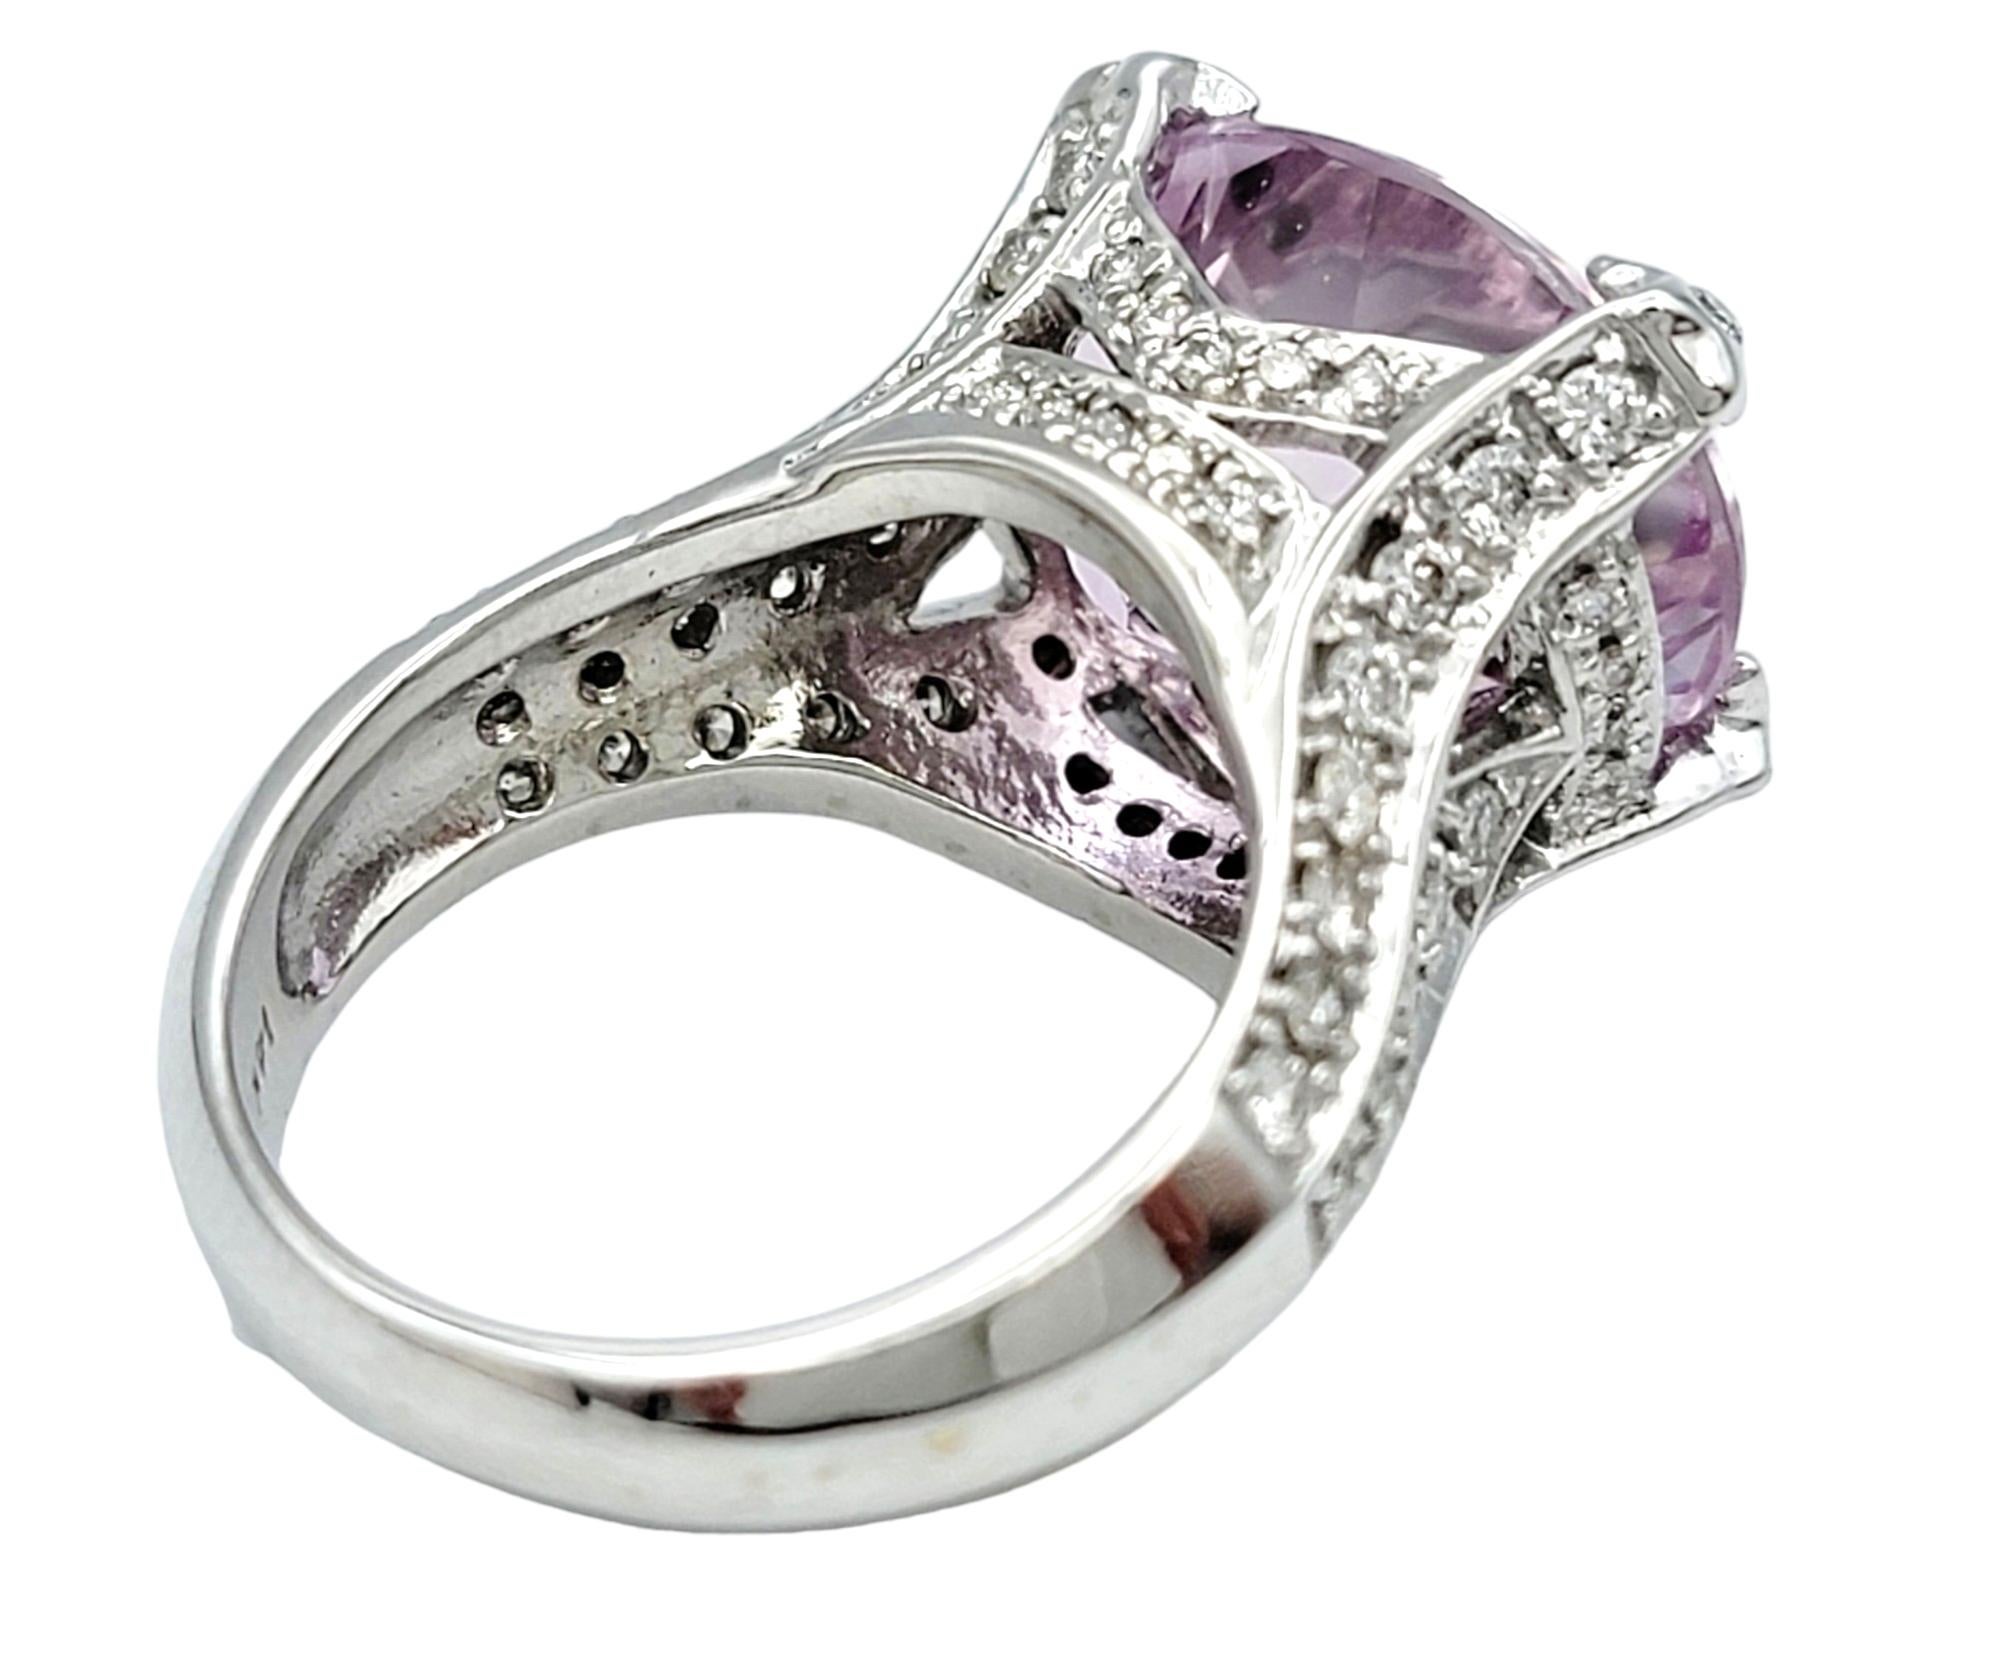 Sonia B. Oval Cut Pink Kunzite Ring with Pave Diamonds in 14 Karat White Gold In Good Condition For Sale In Scottsdale, AZ